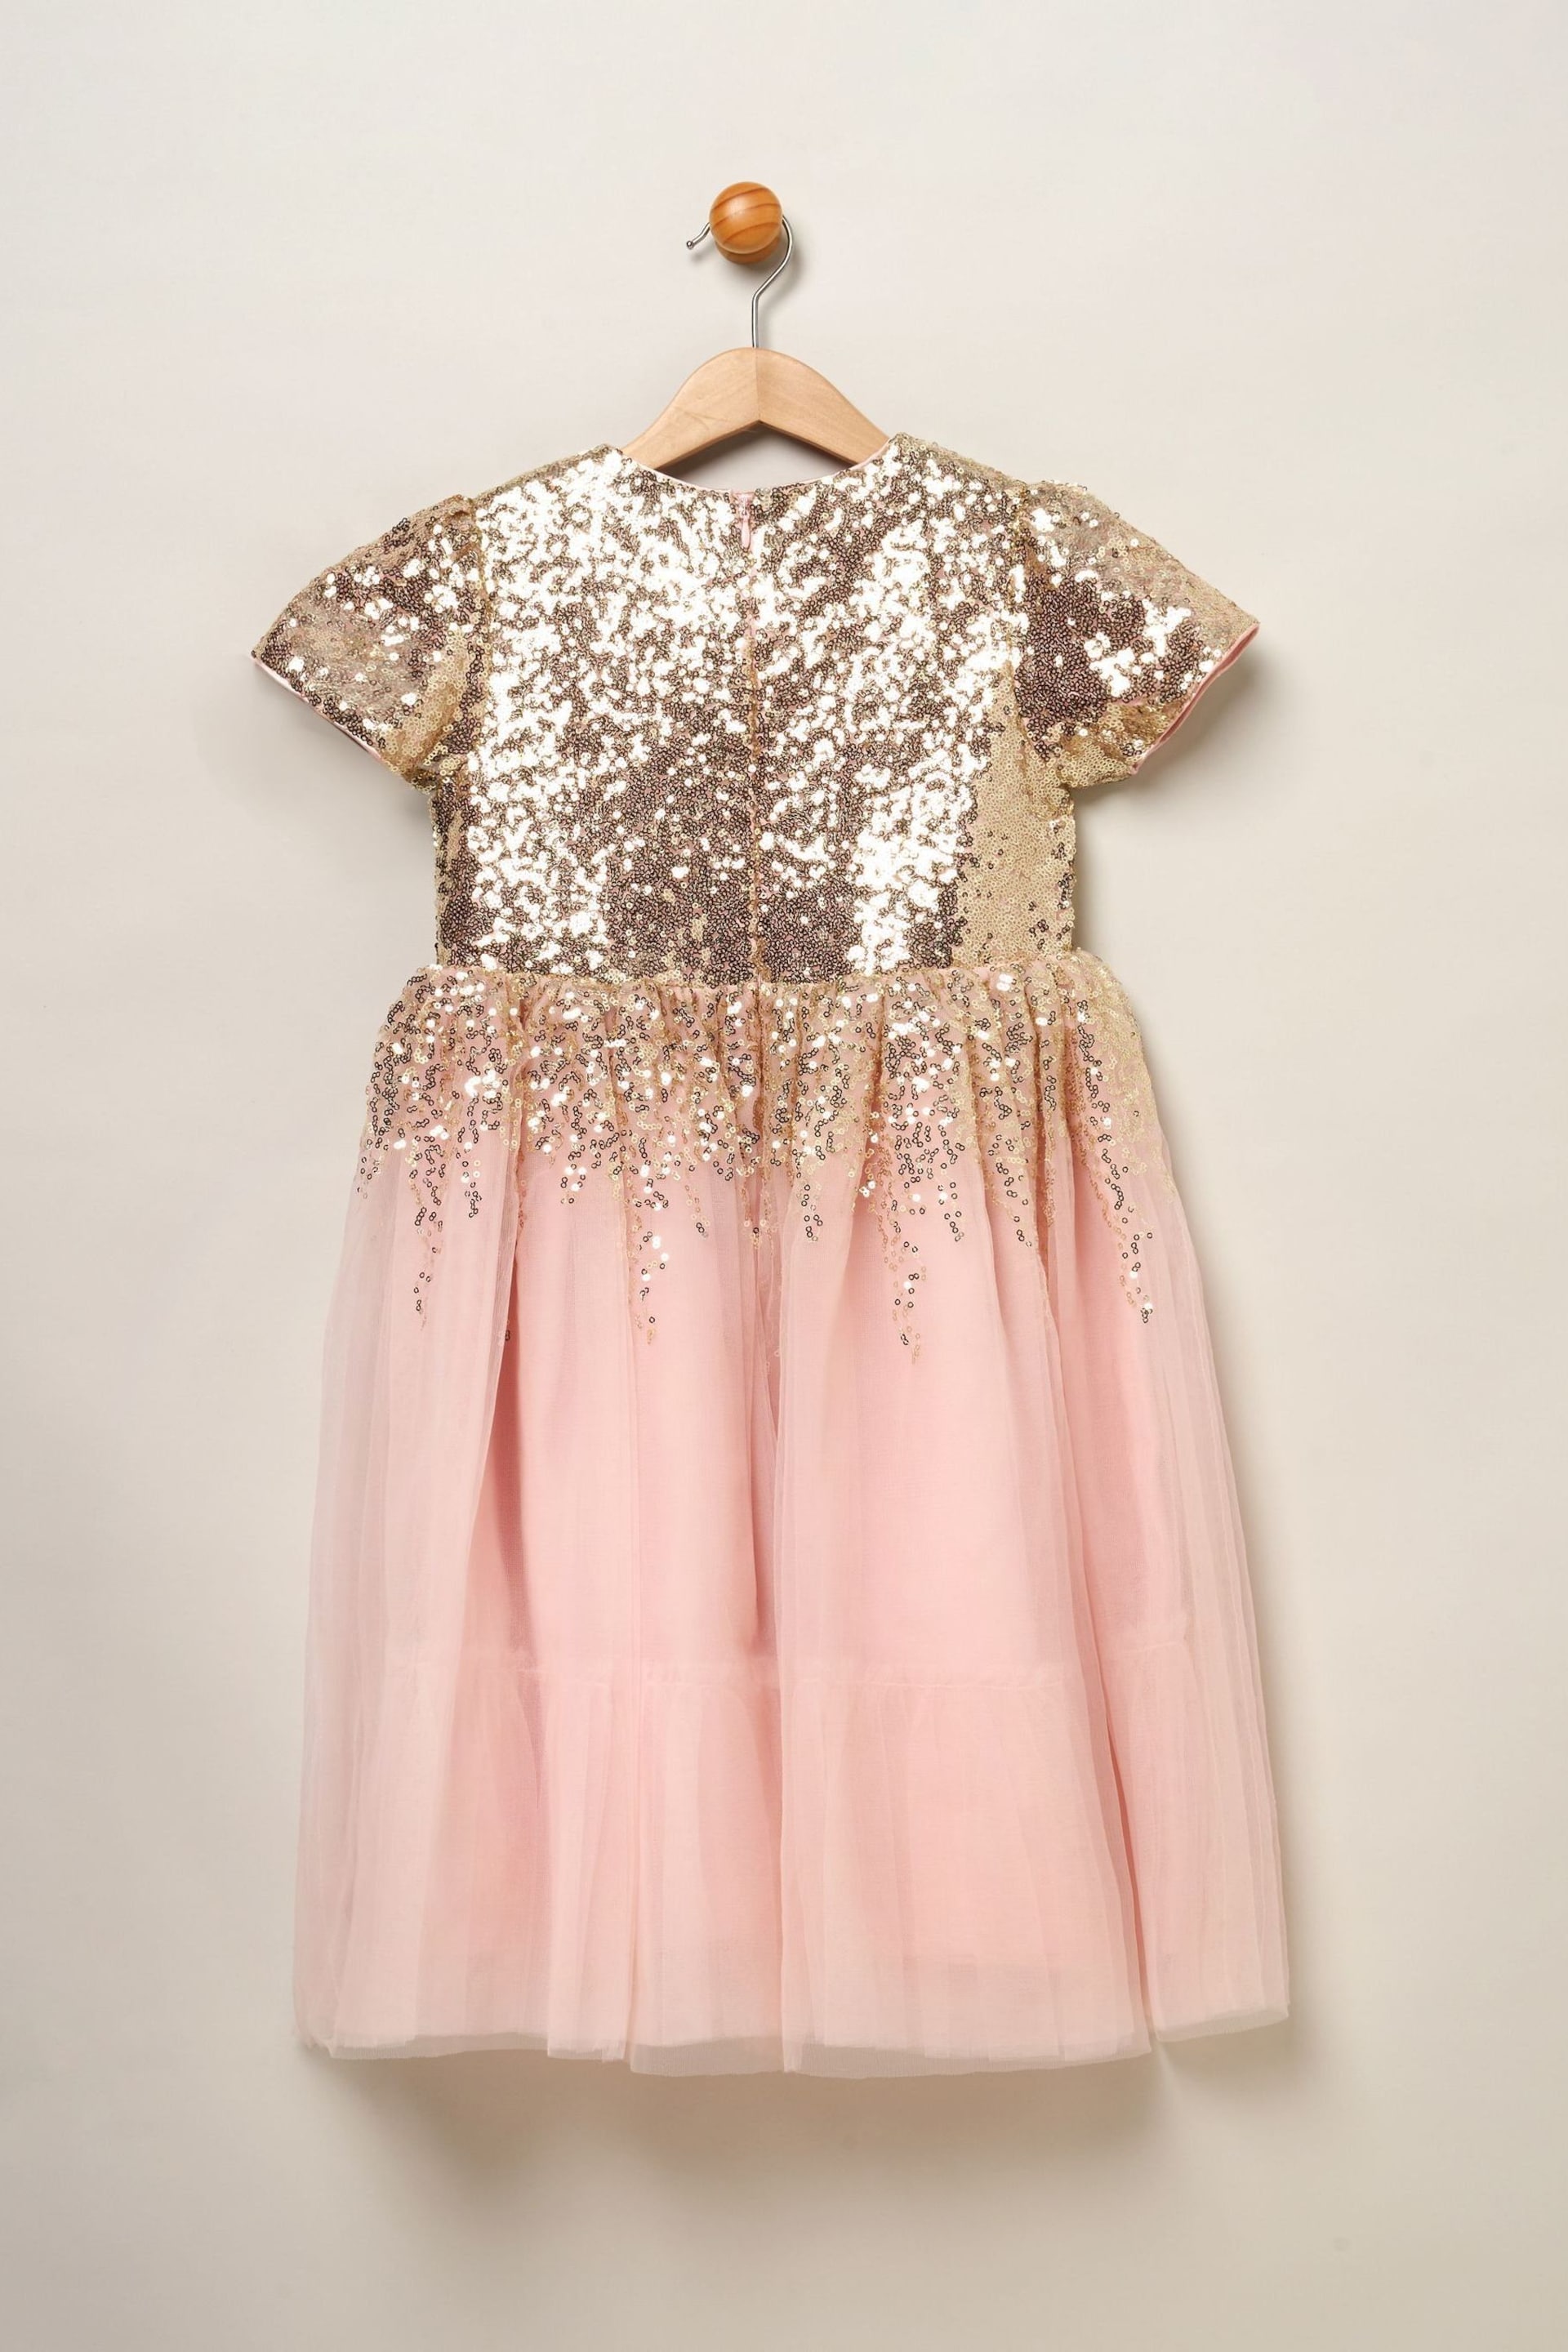 Miss Sequin Waterfall Tulle Skirt Dress - Image 2 of 4